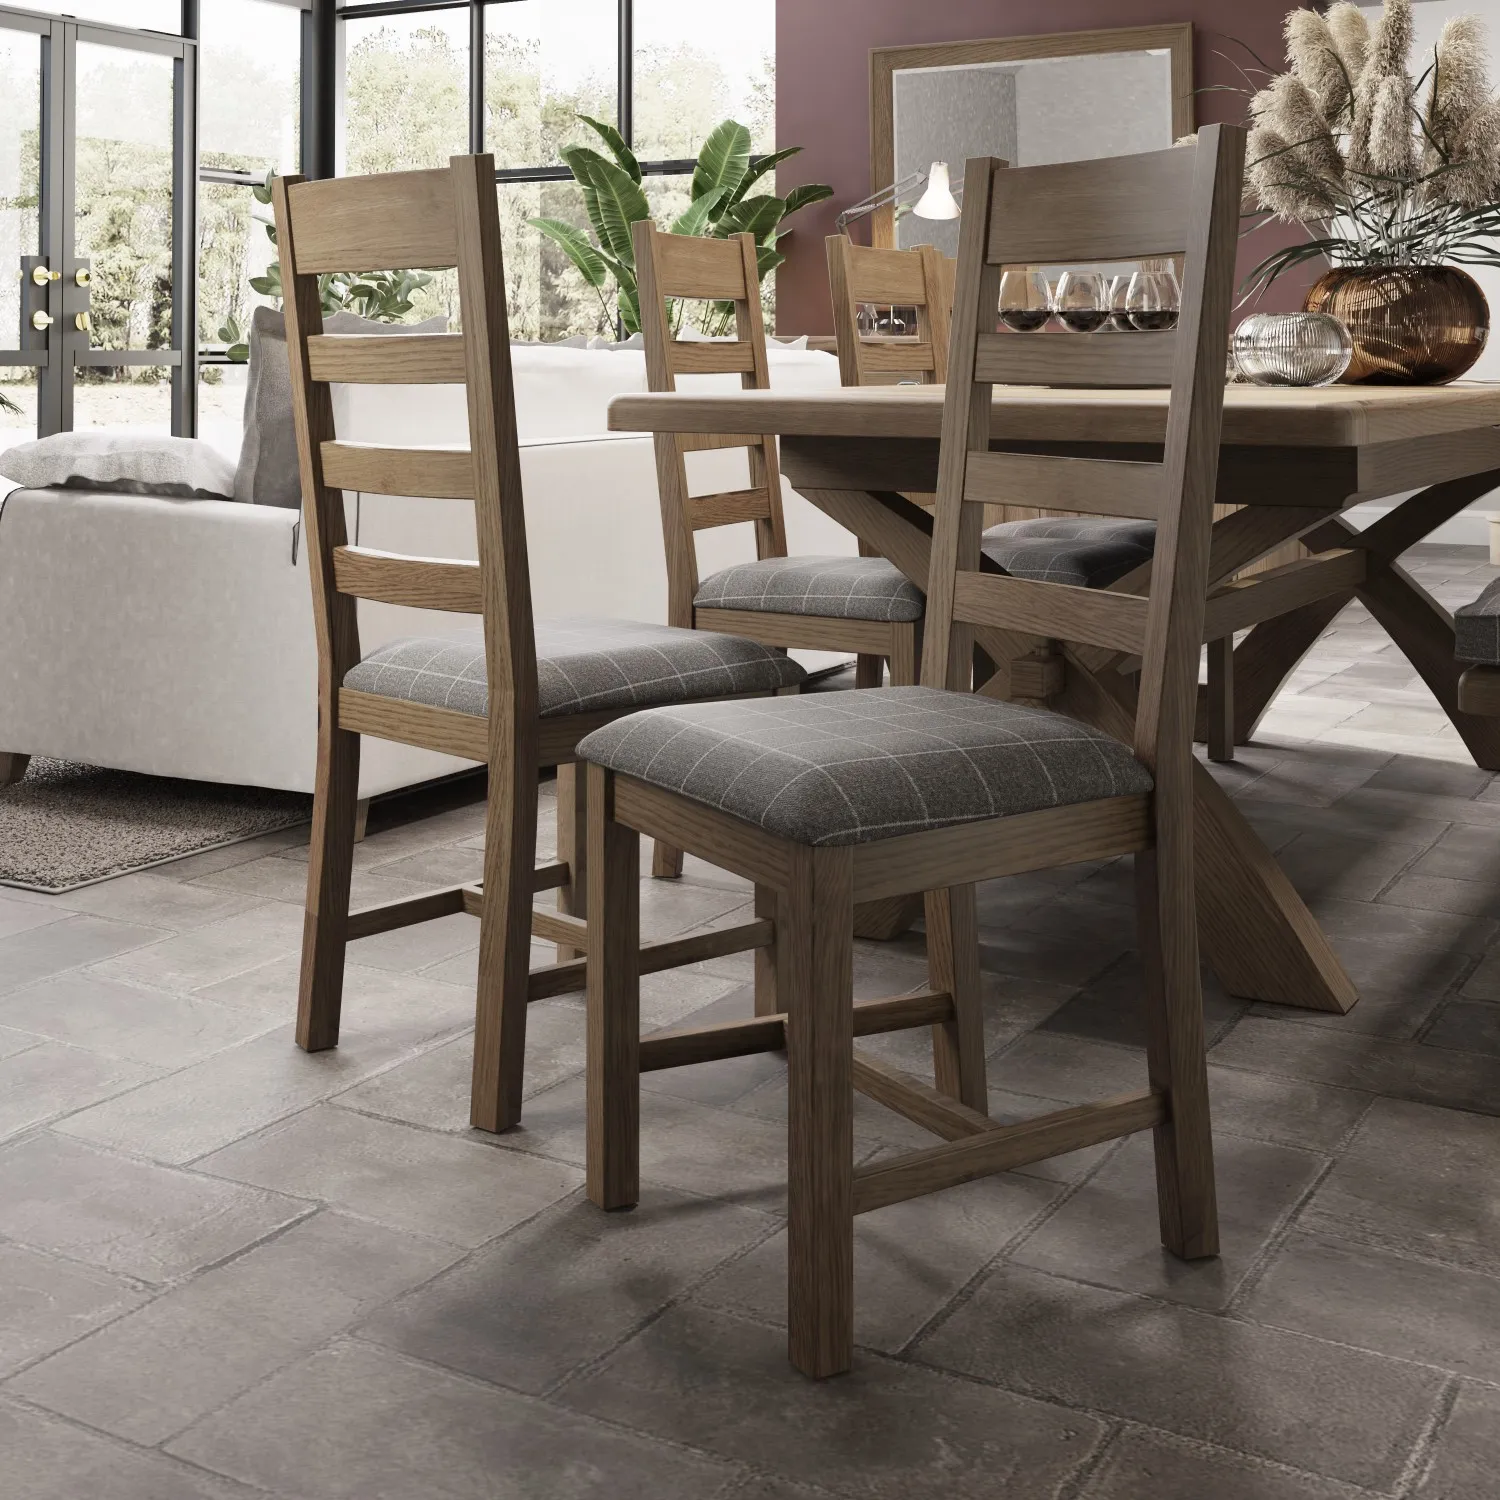 Slatted Dining Chair Grey Check